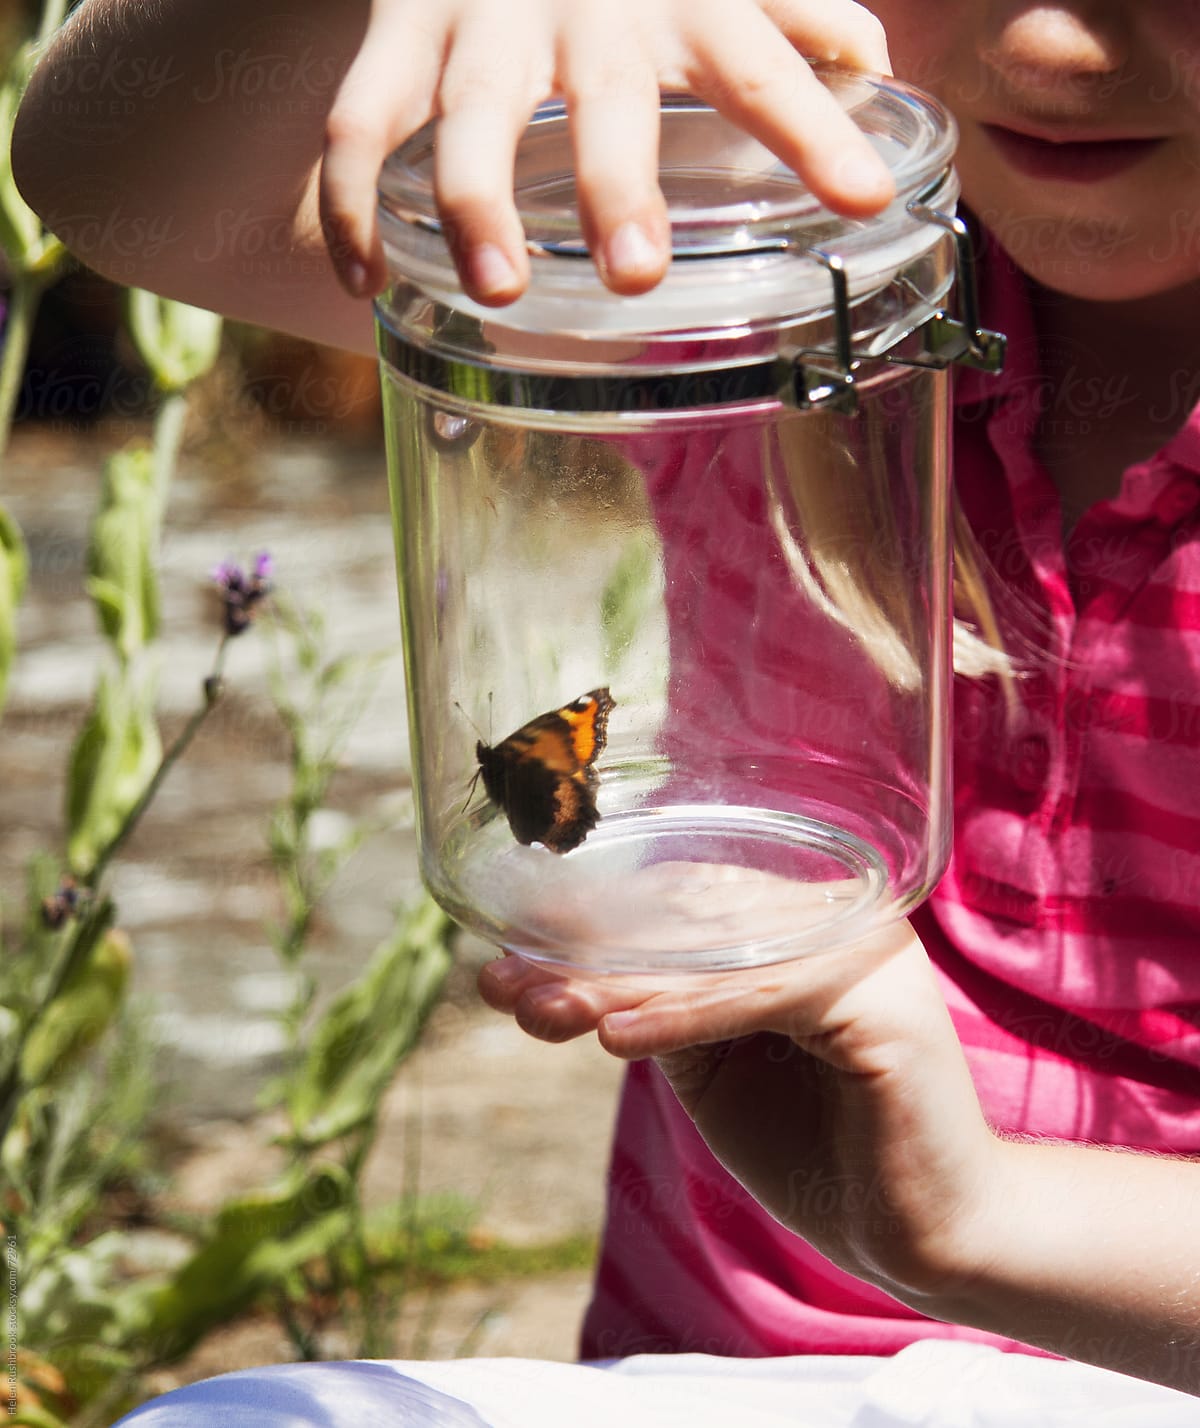 A little girl with a butterfly in a jar